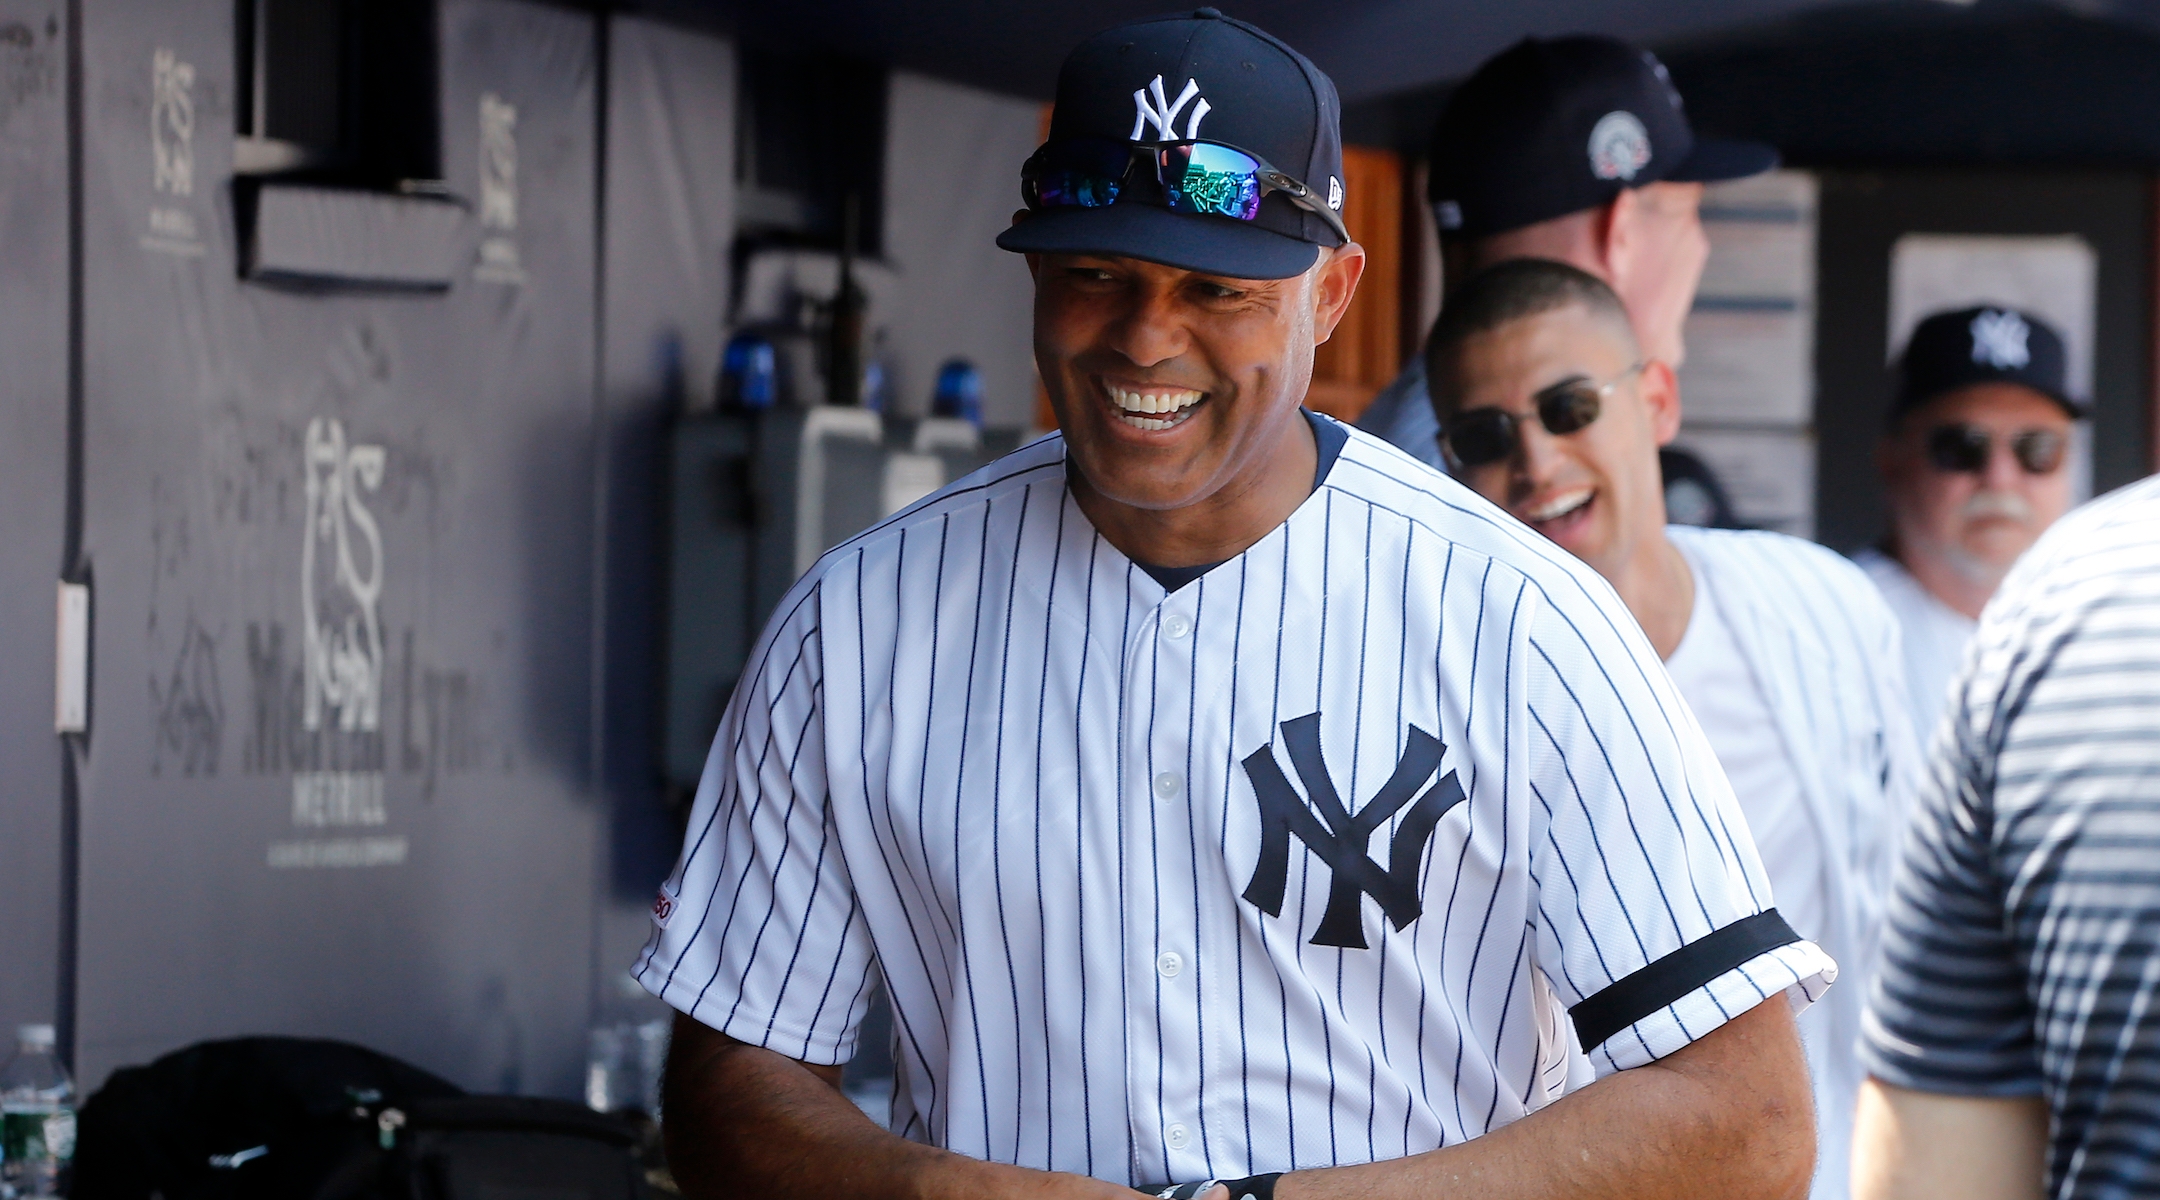 Mariano Rivera, shown at Yankee Stadium, June 23, 2019, has been to Israel twice. (Jim McIsaac/Getty Images)